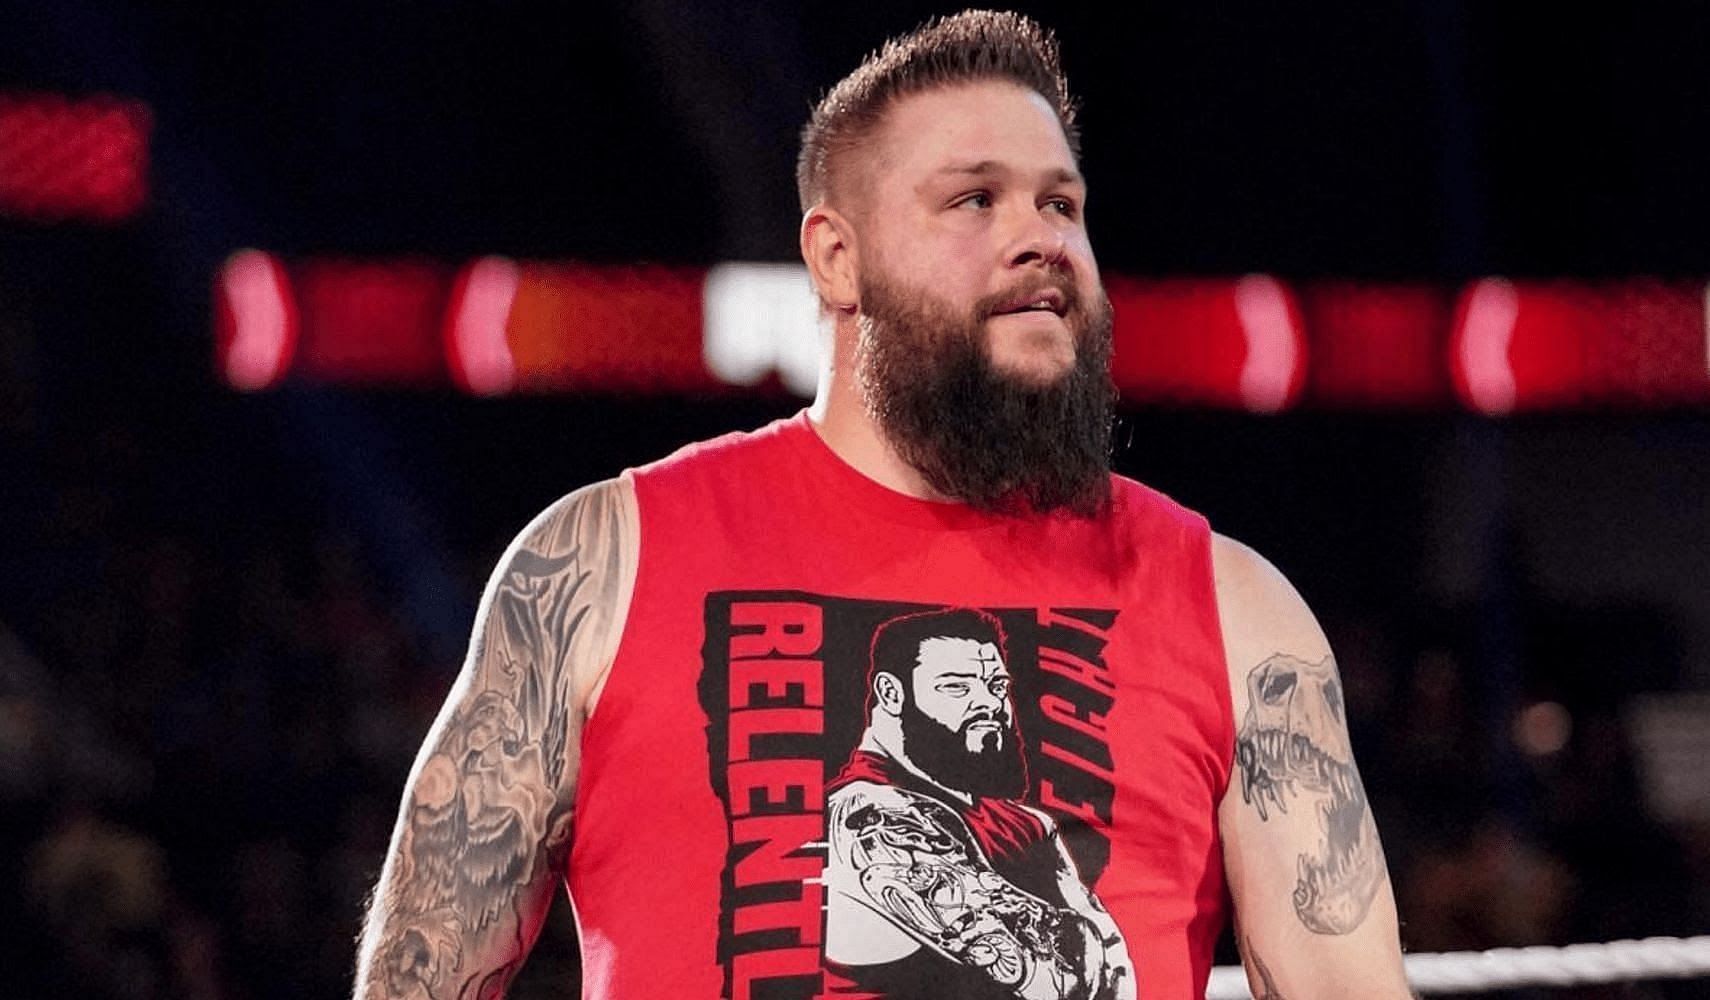 Kevin Owens on Monday night RAW